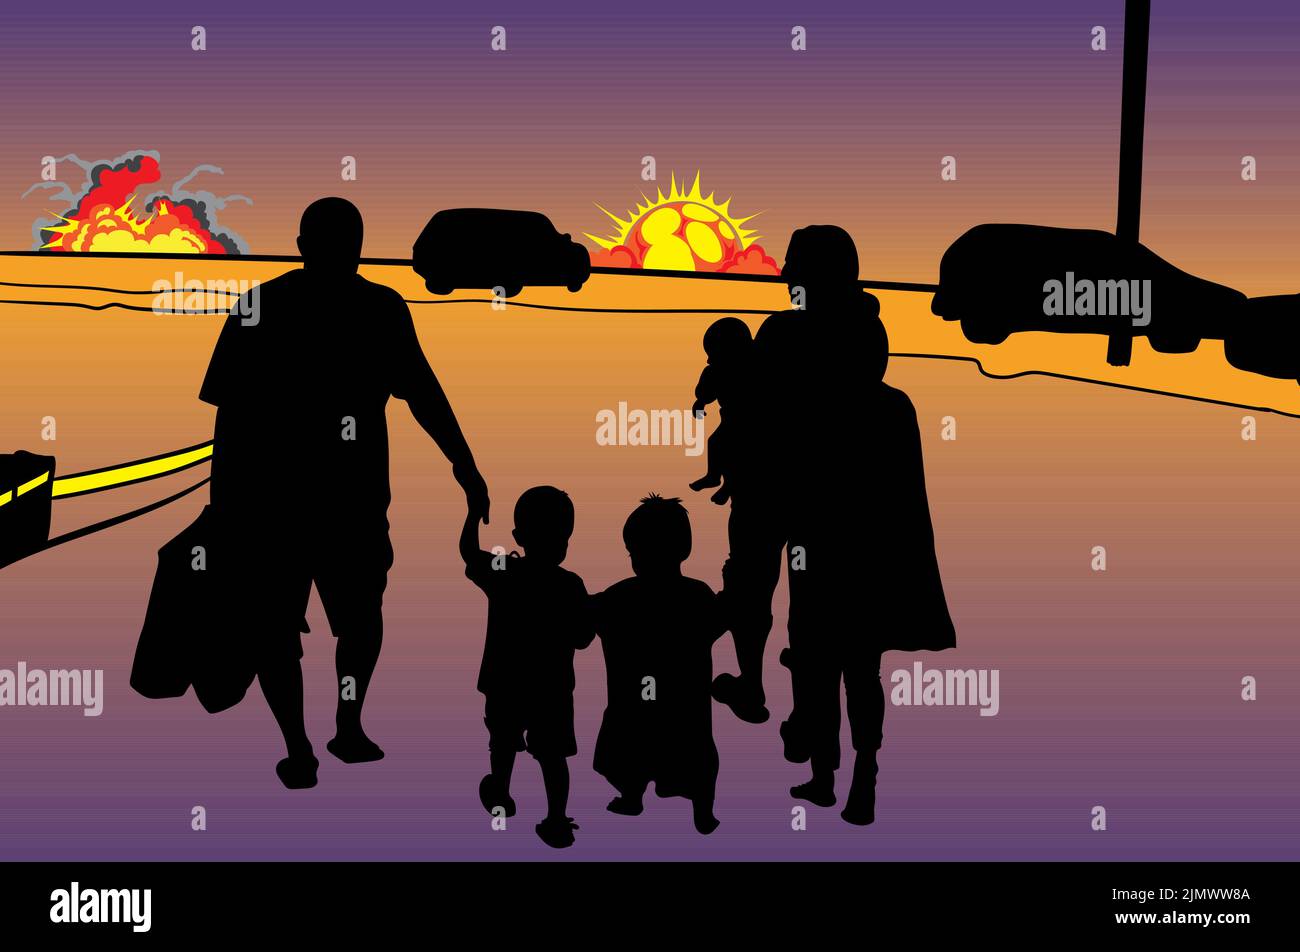 In war situations, families leave home and country concept illustration Stock Vector